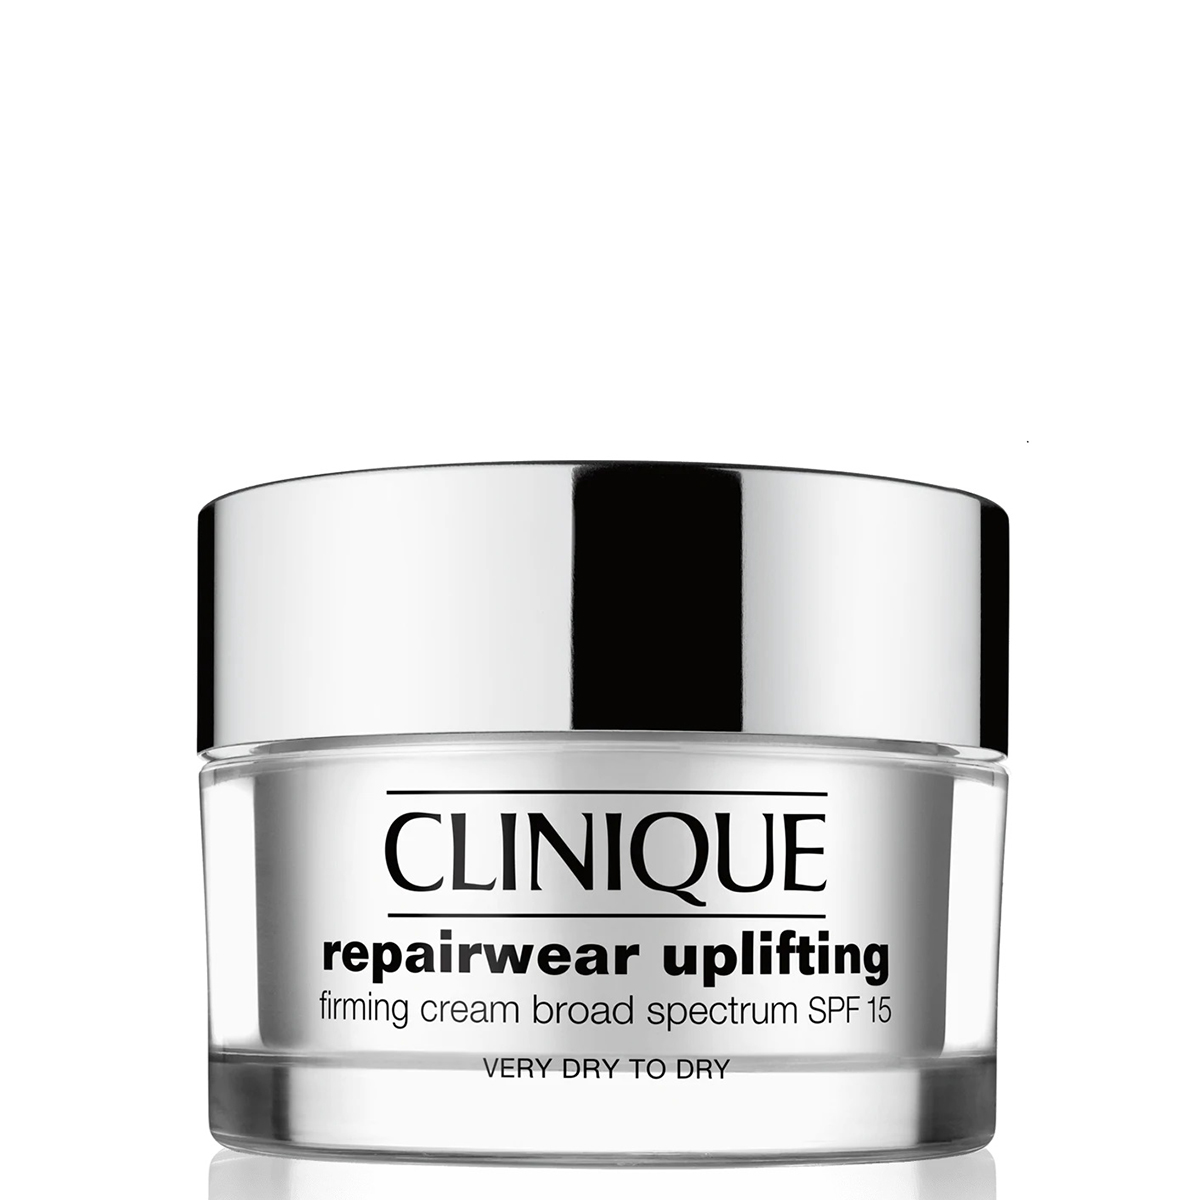 Clinique Repairwear Uplifting Firming Cream SPF 15 - Very Dry